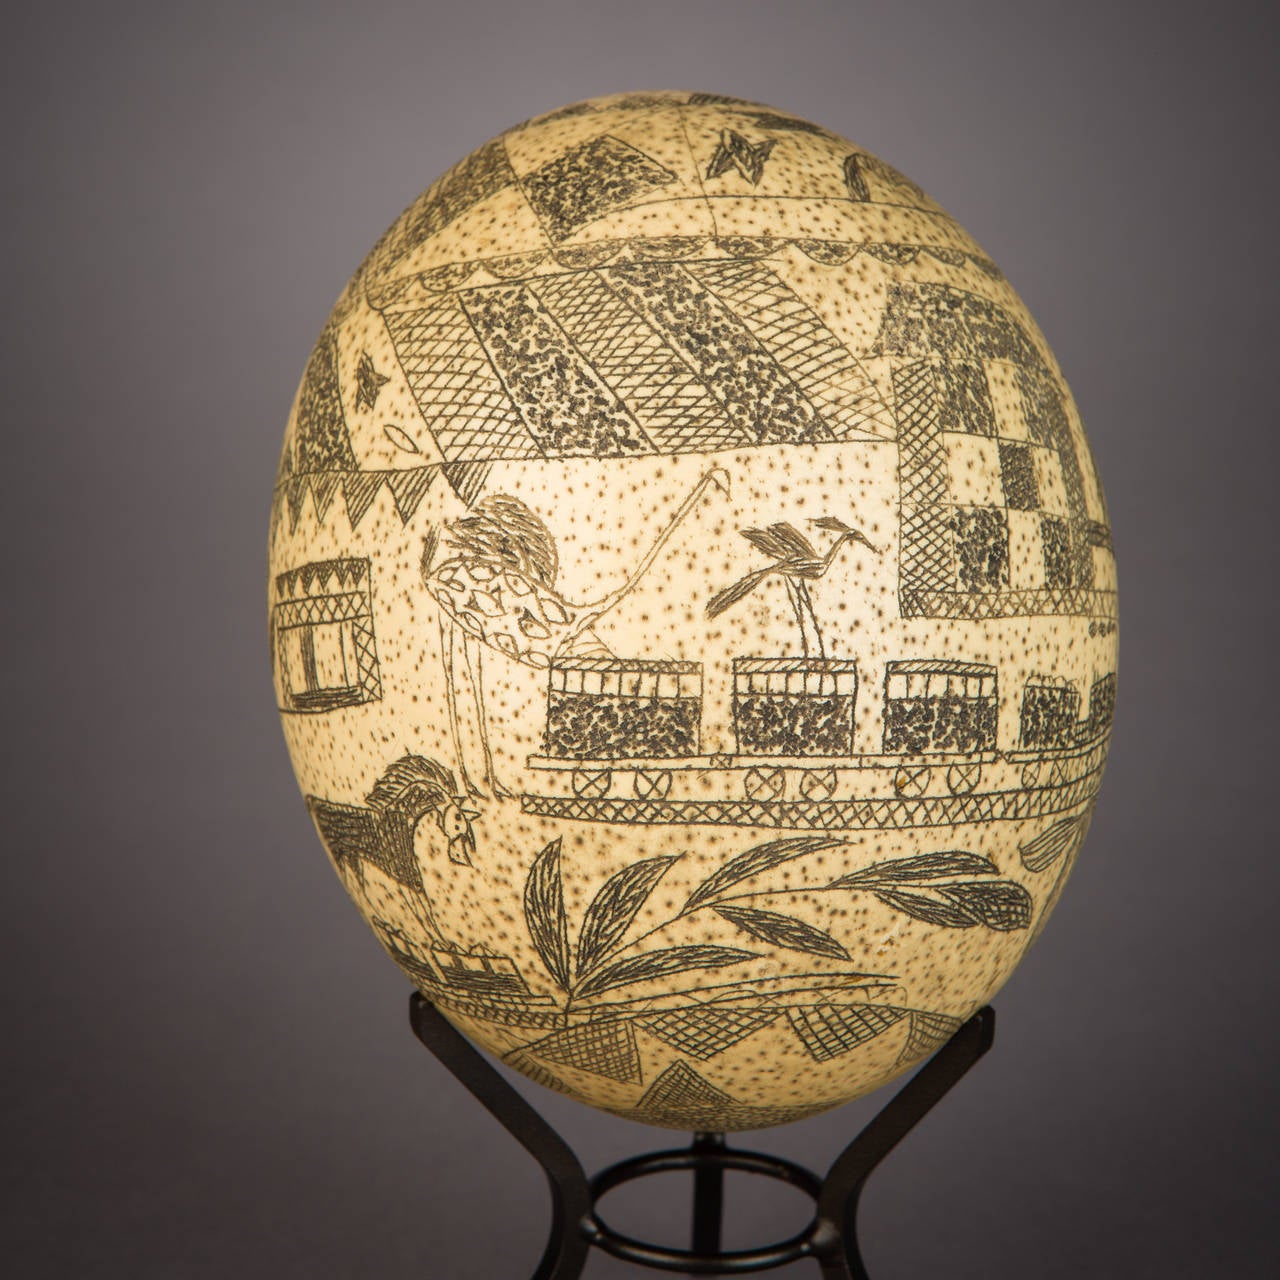 Ostrich eggs adorned with incised images are an ancient form of art in Africa's southern reaches, though few examples display the particular character and content found here. This example was likely carved by a South San carver working in the Cape